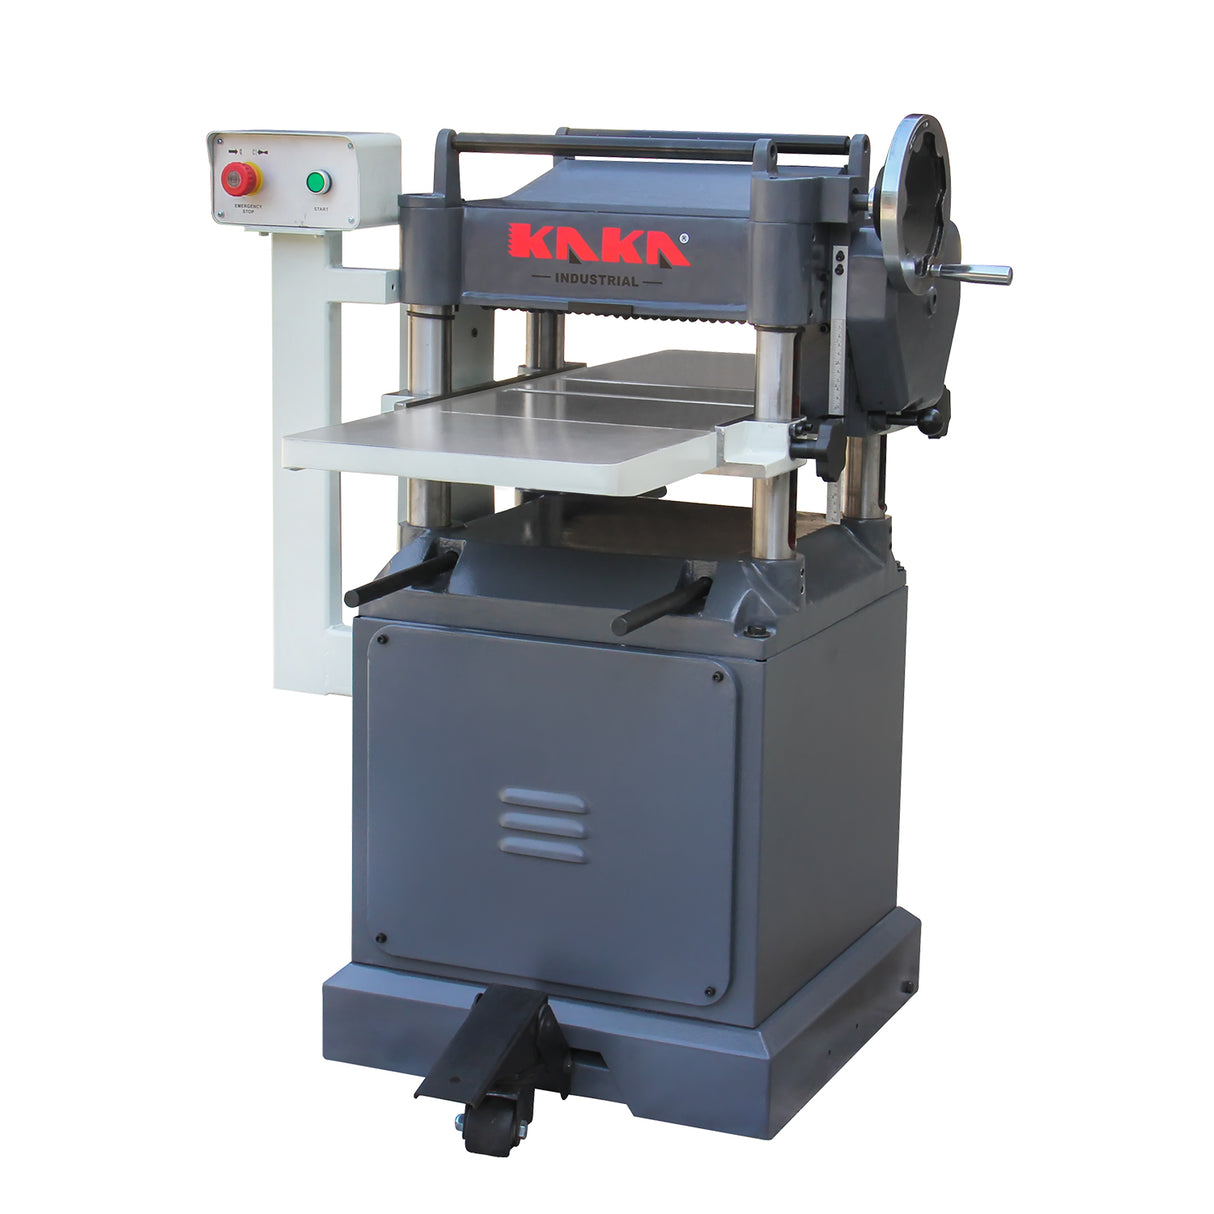 Kaka industrial WDP-4215 ,15 inch Width 8" Max Height,Woodworking Planer with Built in Mobile Base and Helical Cutterhead  220V-60HZ-1PH